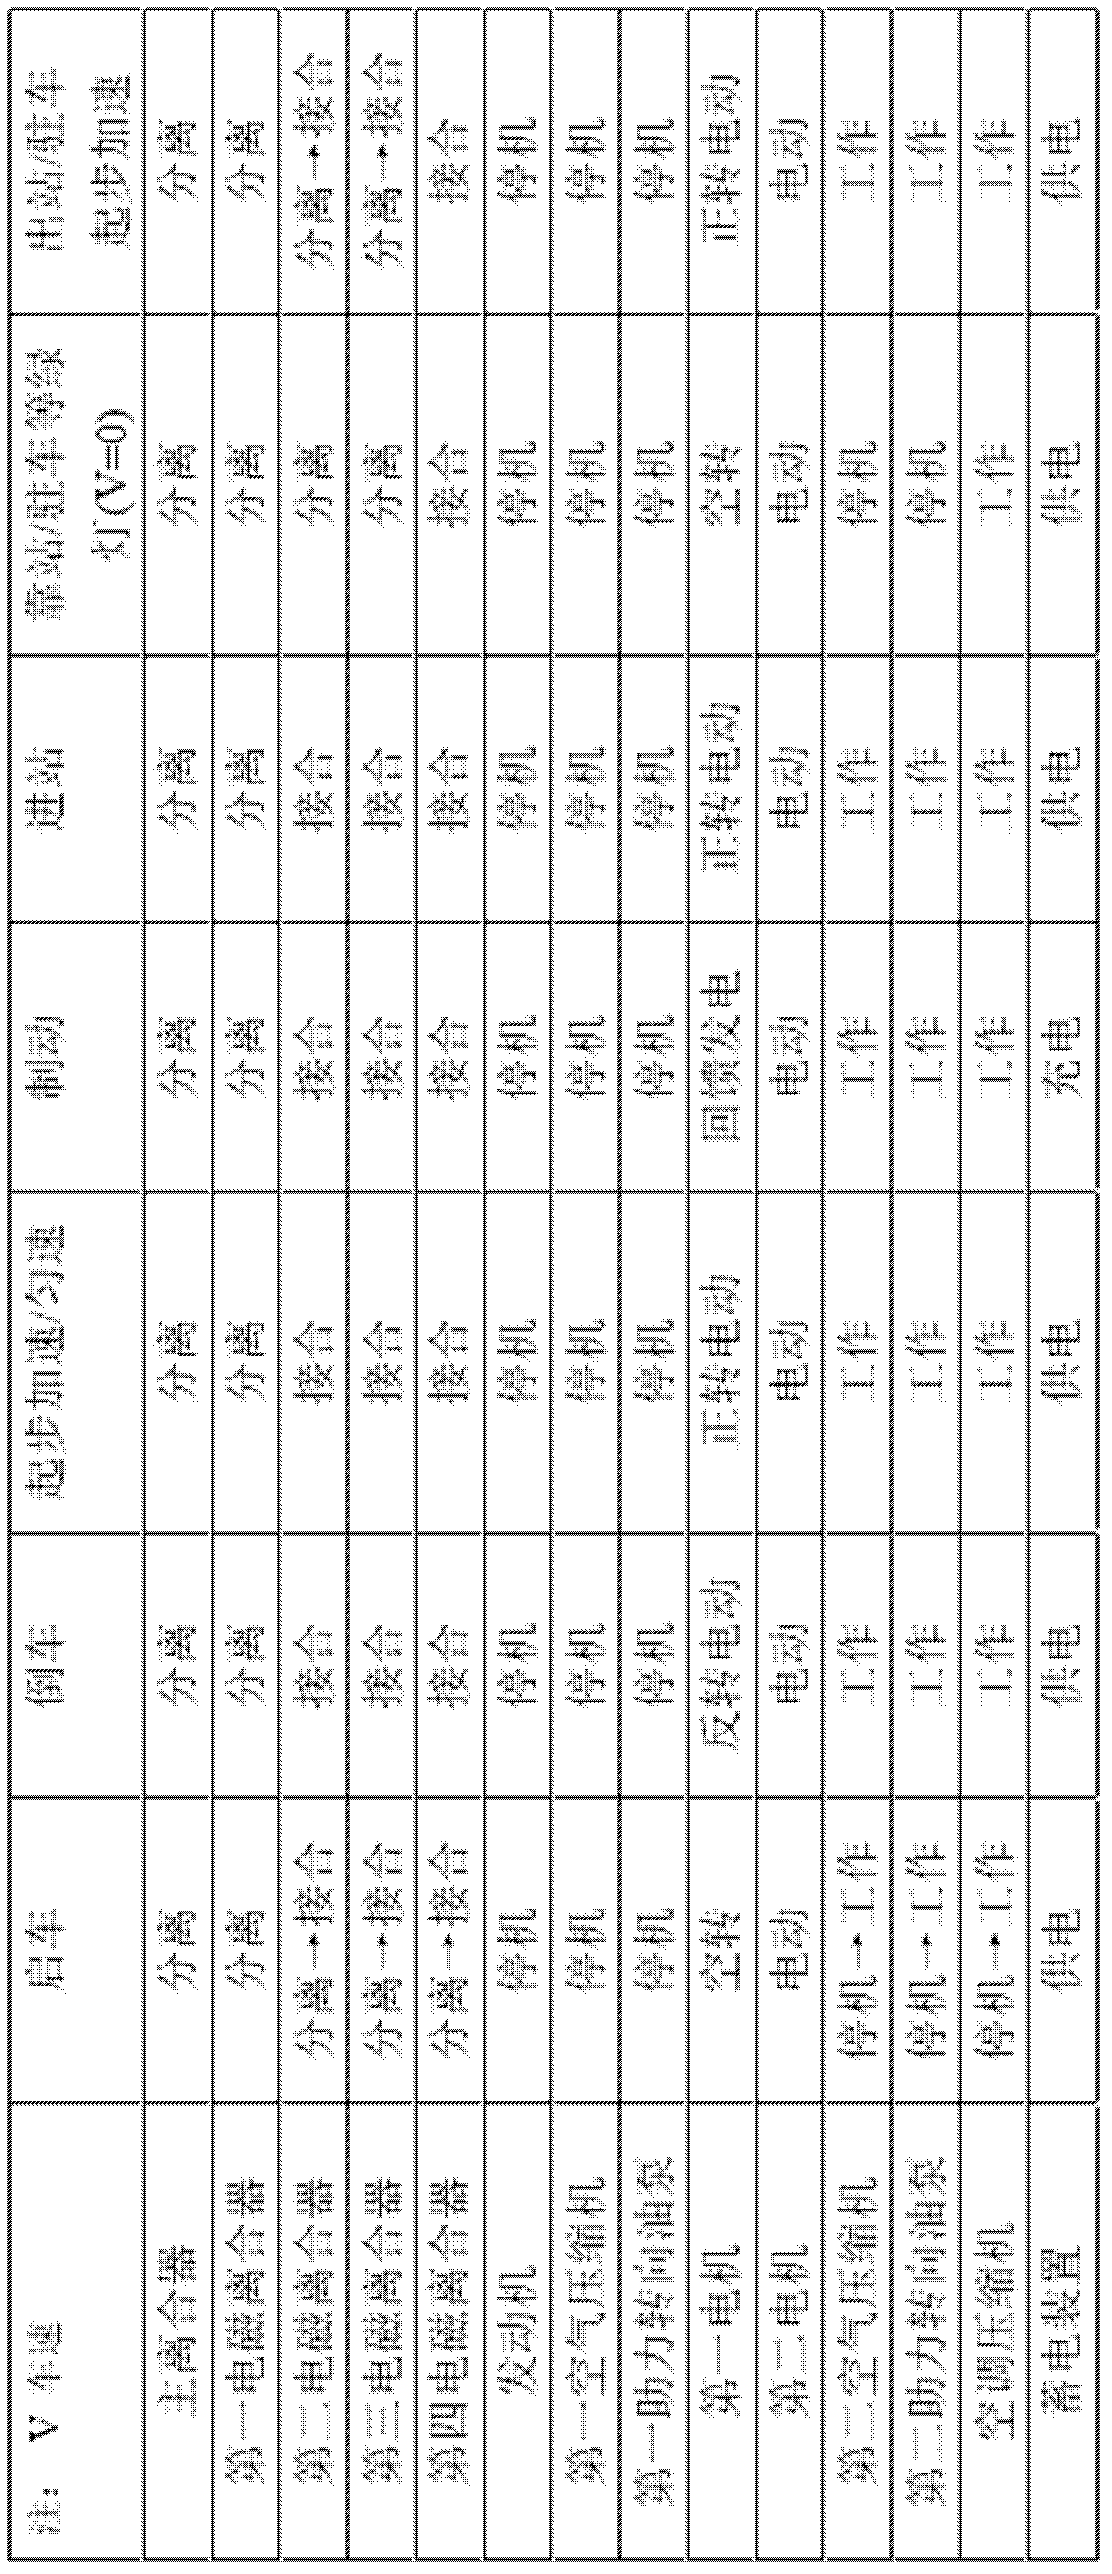 Series-parallel combined type hybrid power assembly